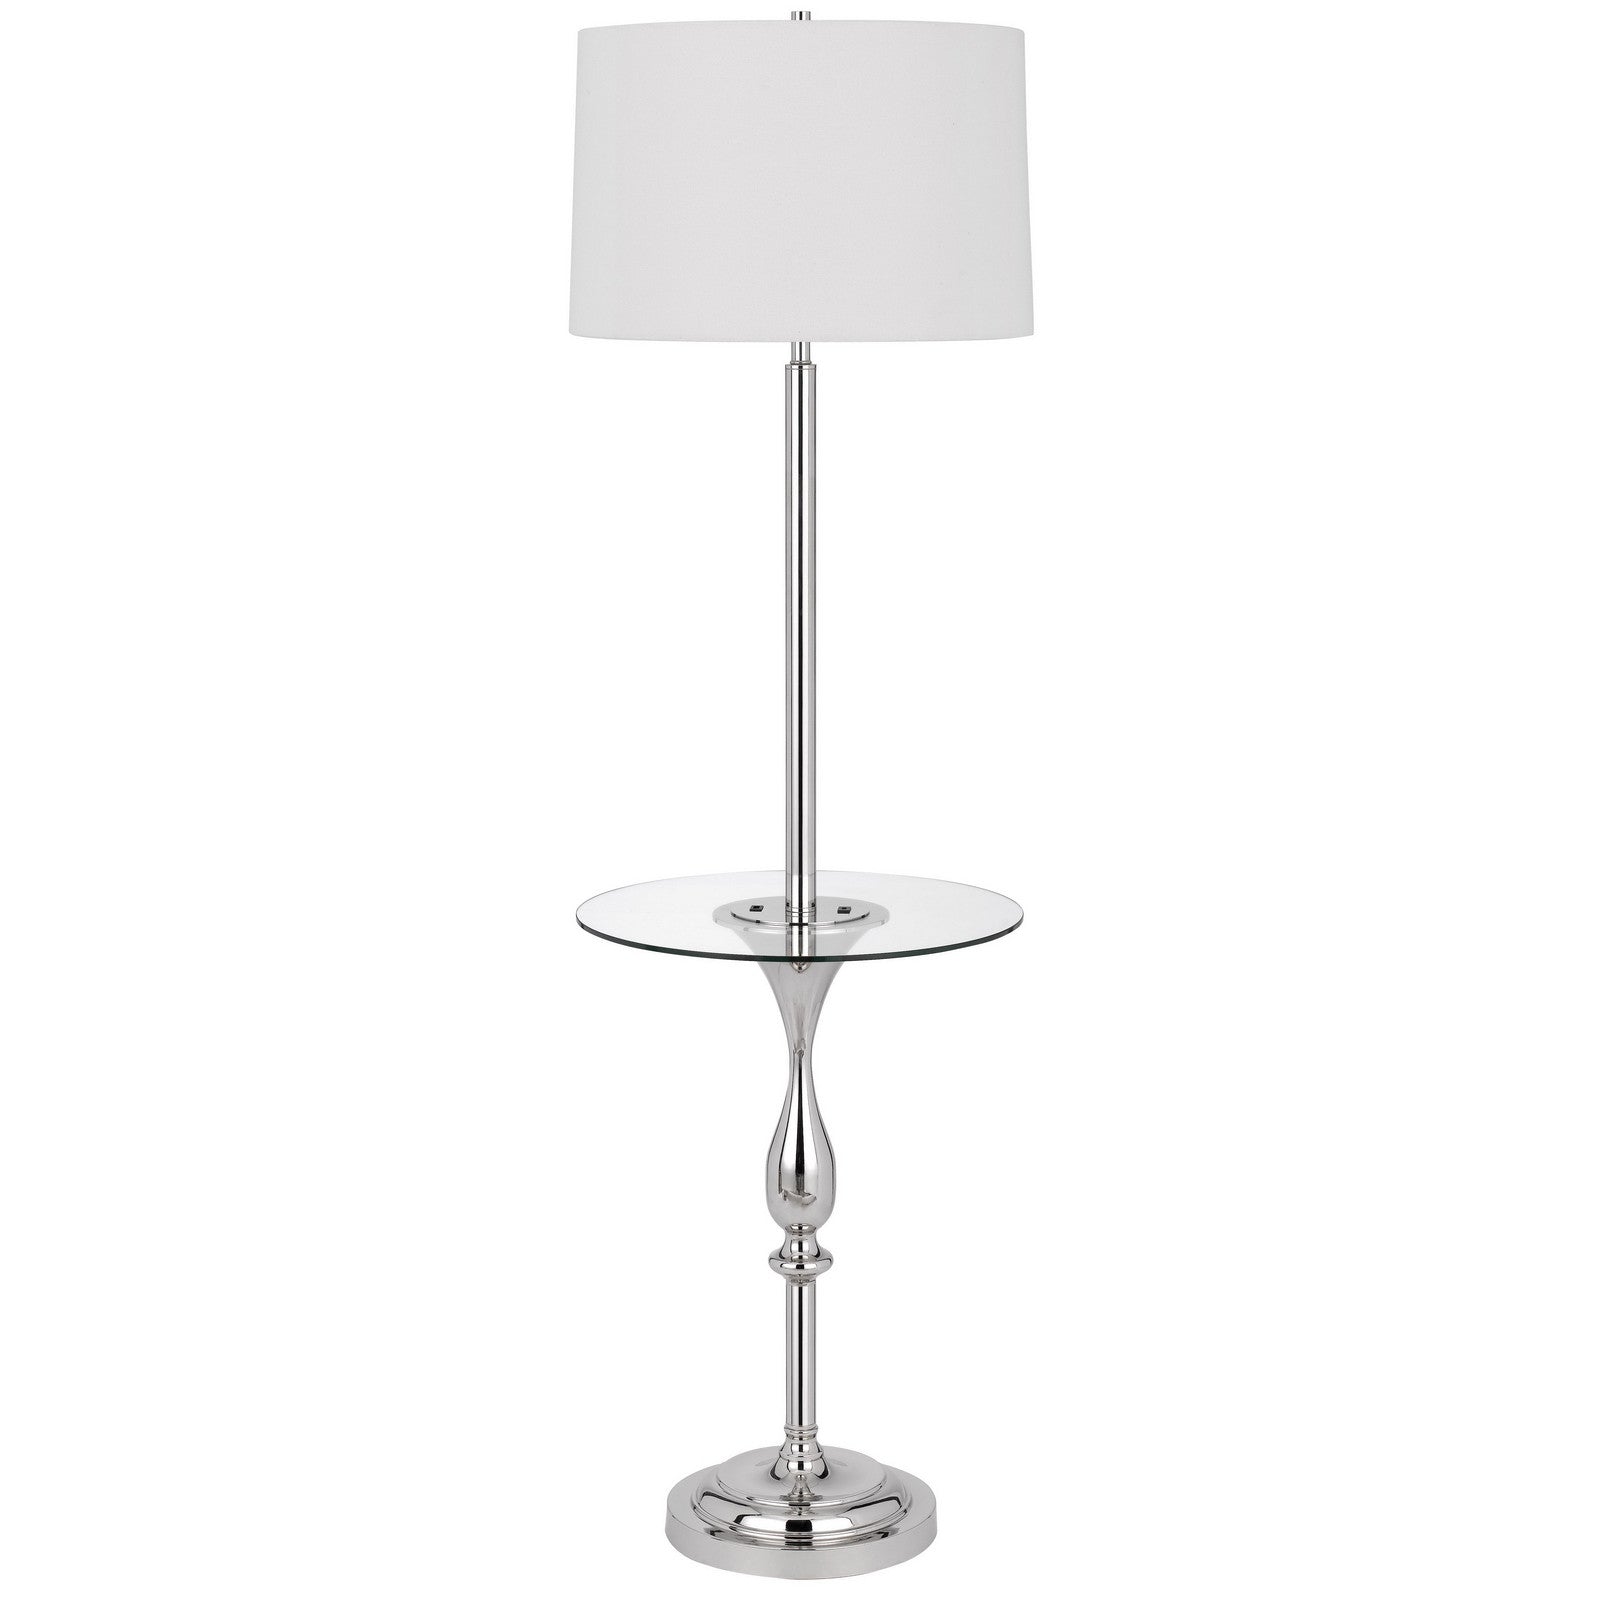 61" Chrome Tray Table Floor Lamp With White Transparent Glass Square Shade